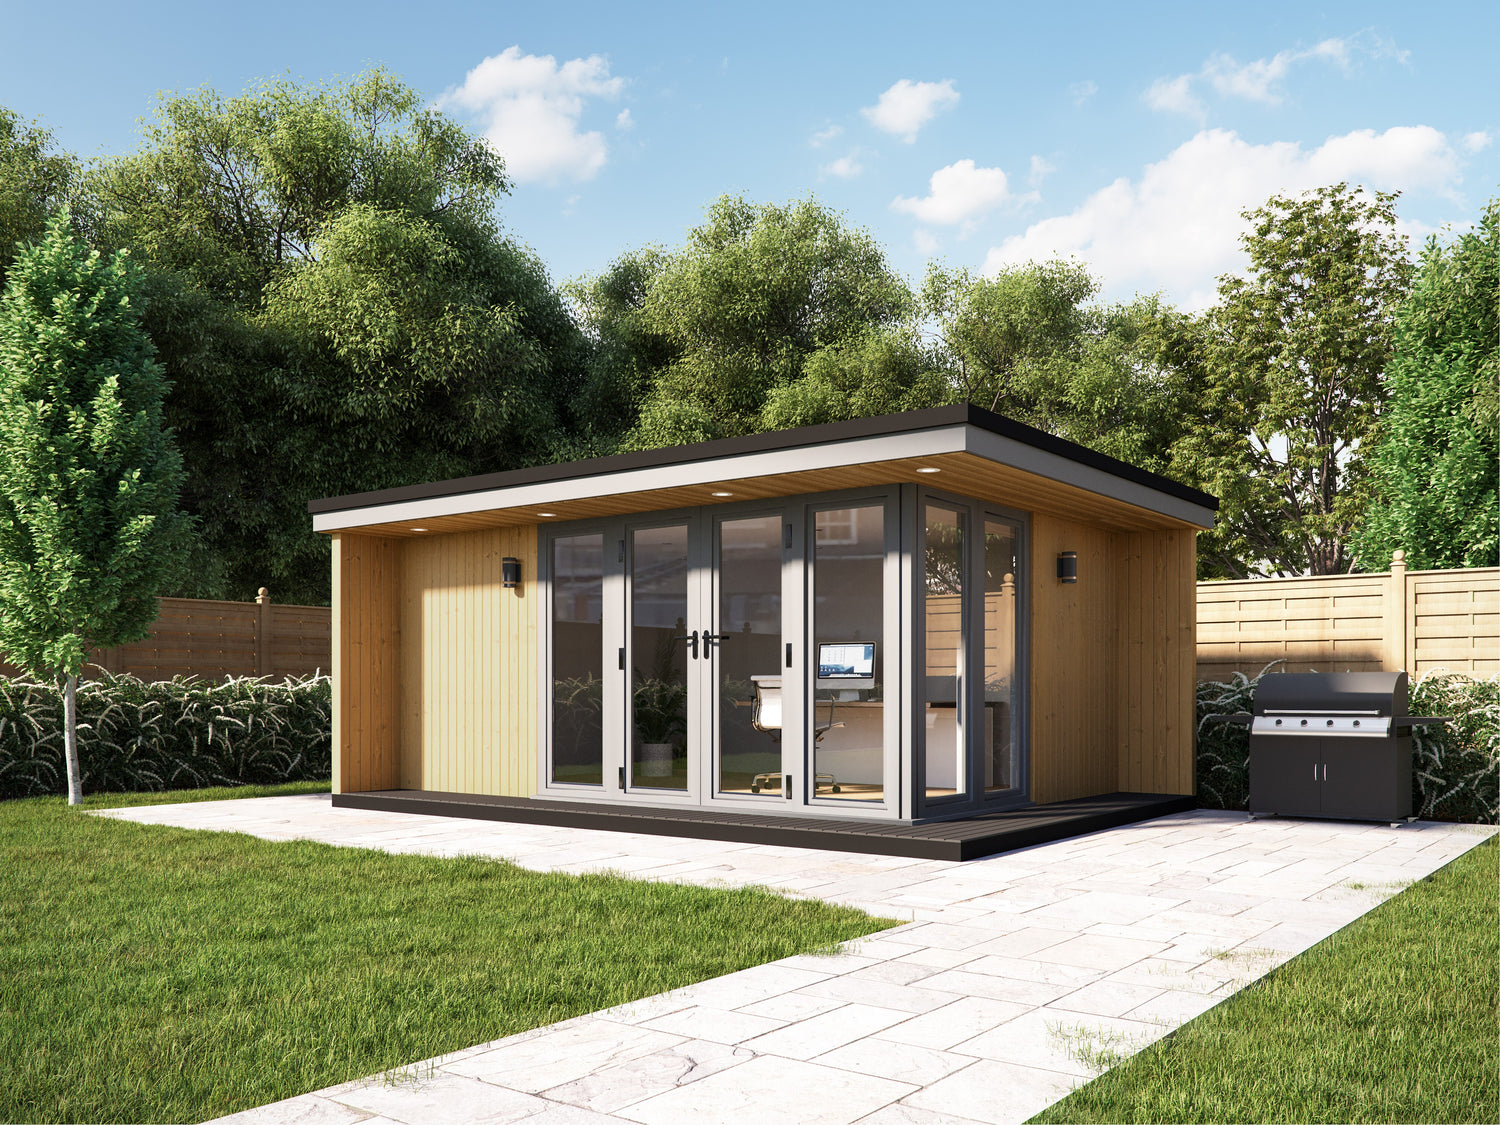 A rendering of a small garden office.